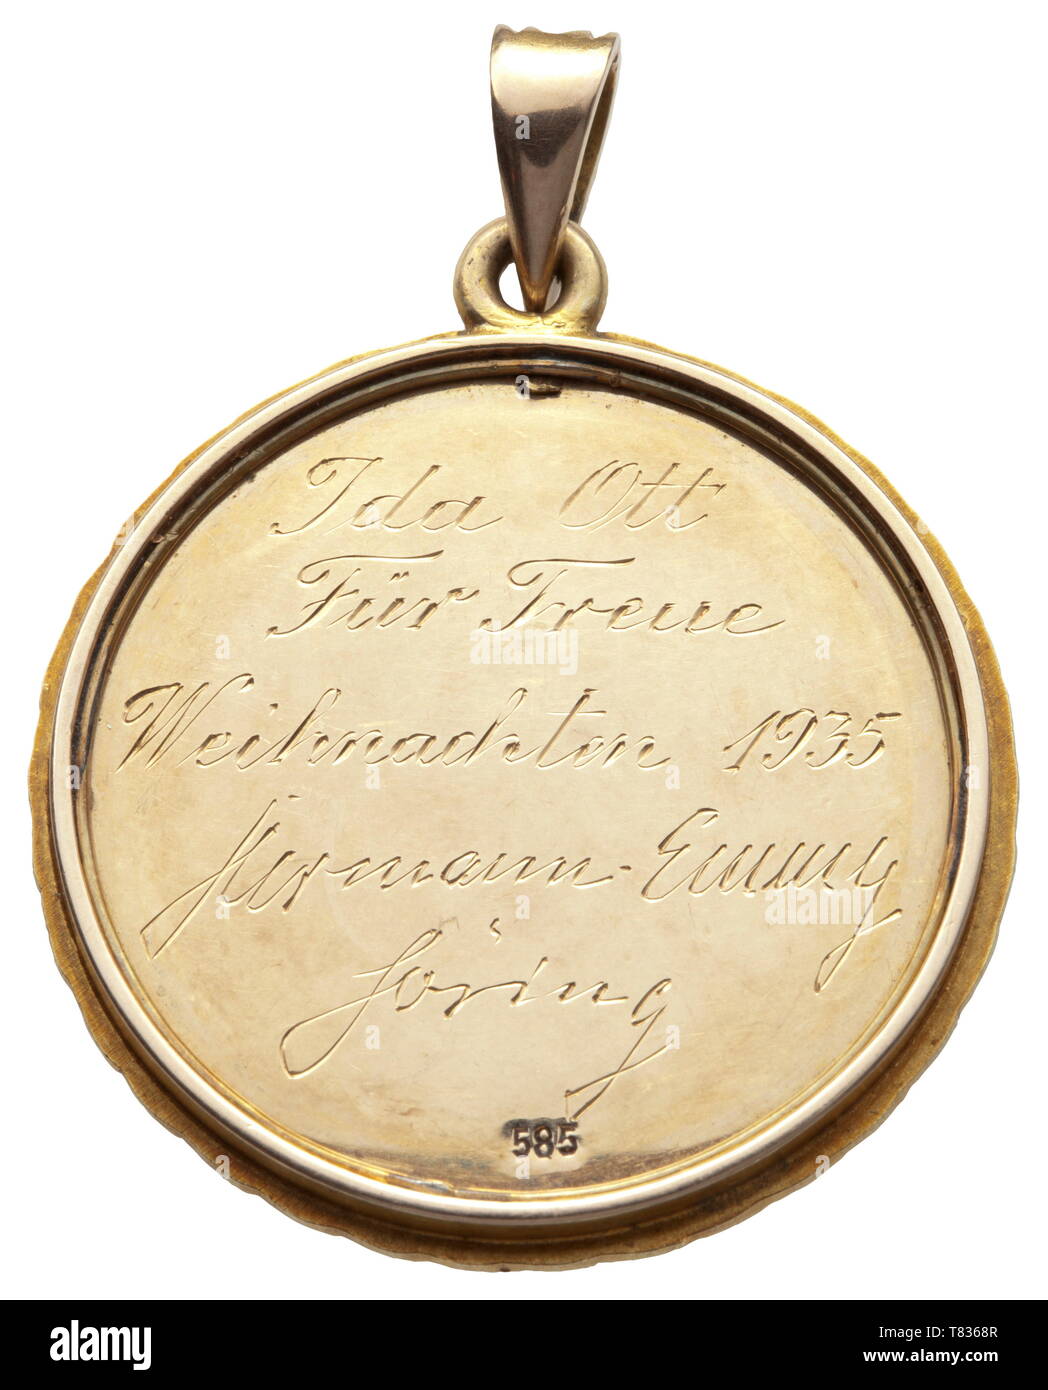 Hermann and Emmy Göring - a House Order of Loyalty, 1935 Gold, bordered by a laurel wreath. In the centre an applied swastika with set sapphires surmounting the enamelled coats of arms of the Göring and Sonnemann families, all within a Gothic trefoil. On the back the dedication engraving 'Ida Ott Für Treue Weihnachten 1935 Hermann-Emmy Göring'. Diameter 30.5 mm, 14 g. Very rare (only one very similar piece is known) distinction awarded to long-standing employees of Göring's private surroundings. historic, historical, 20th century, 1930s, NS, National Socialism, Nazism, Thir, Editorial-Use-Only Stock Photo